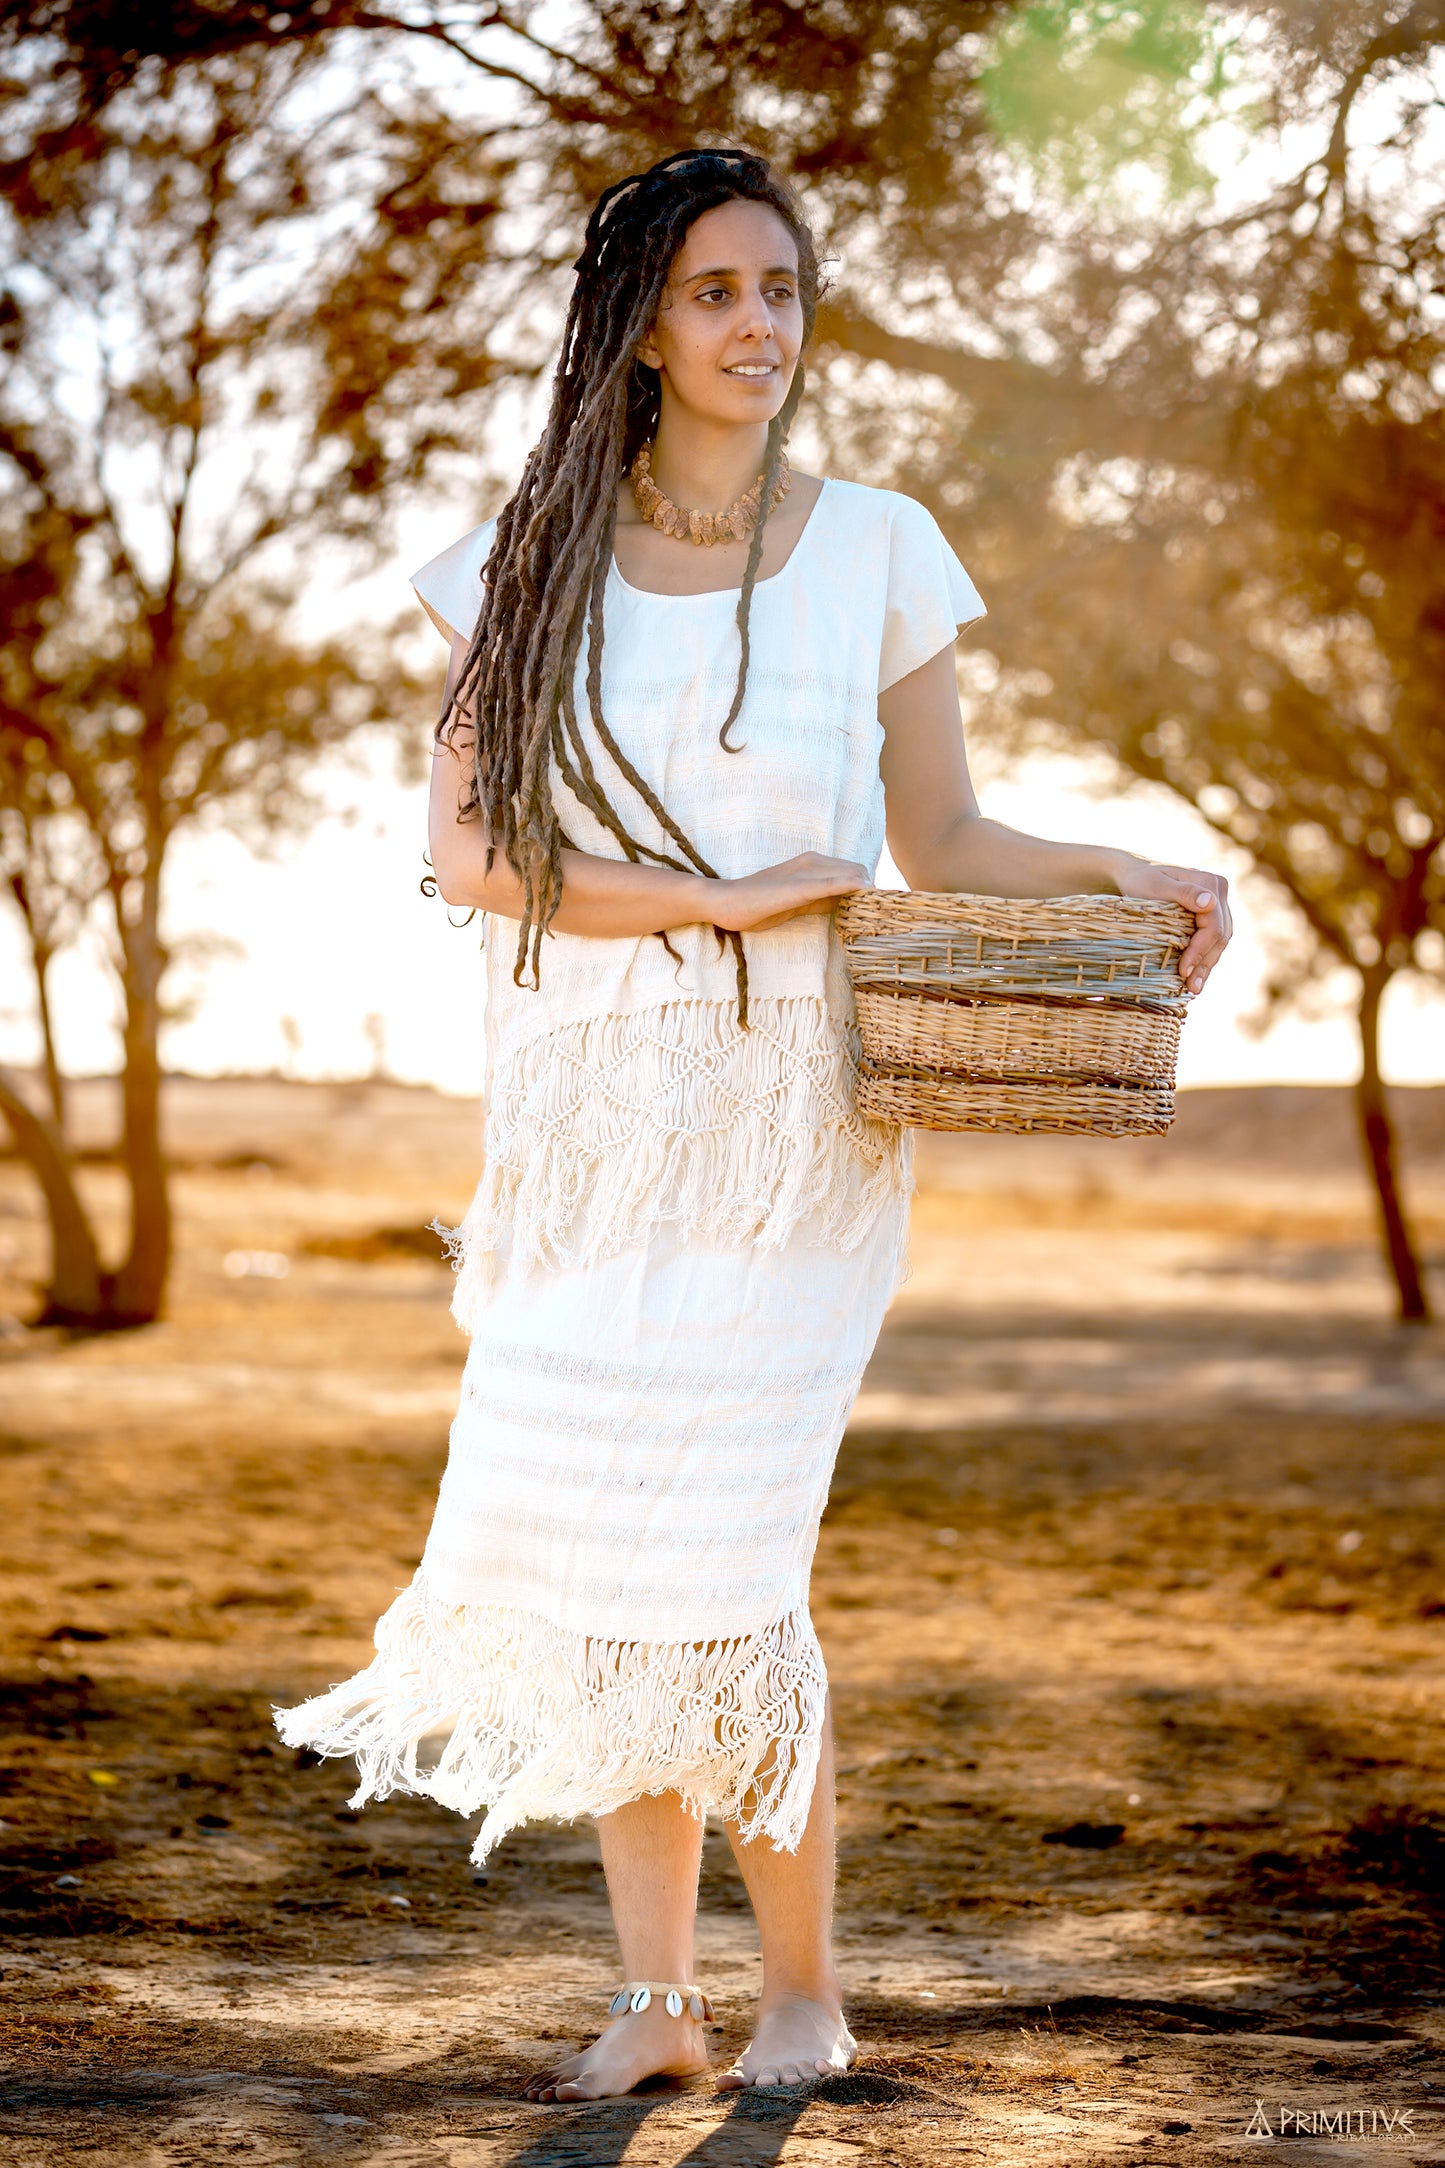 Oaxaca ⋙ Woven Cotton Outfit ⋙ Skirt and Top